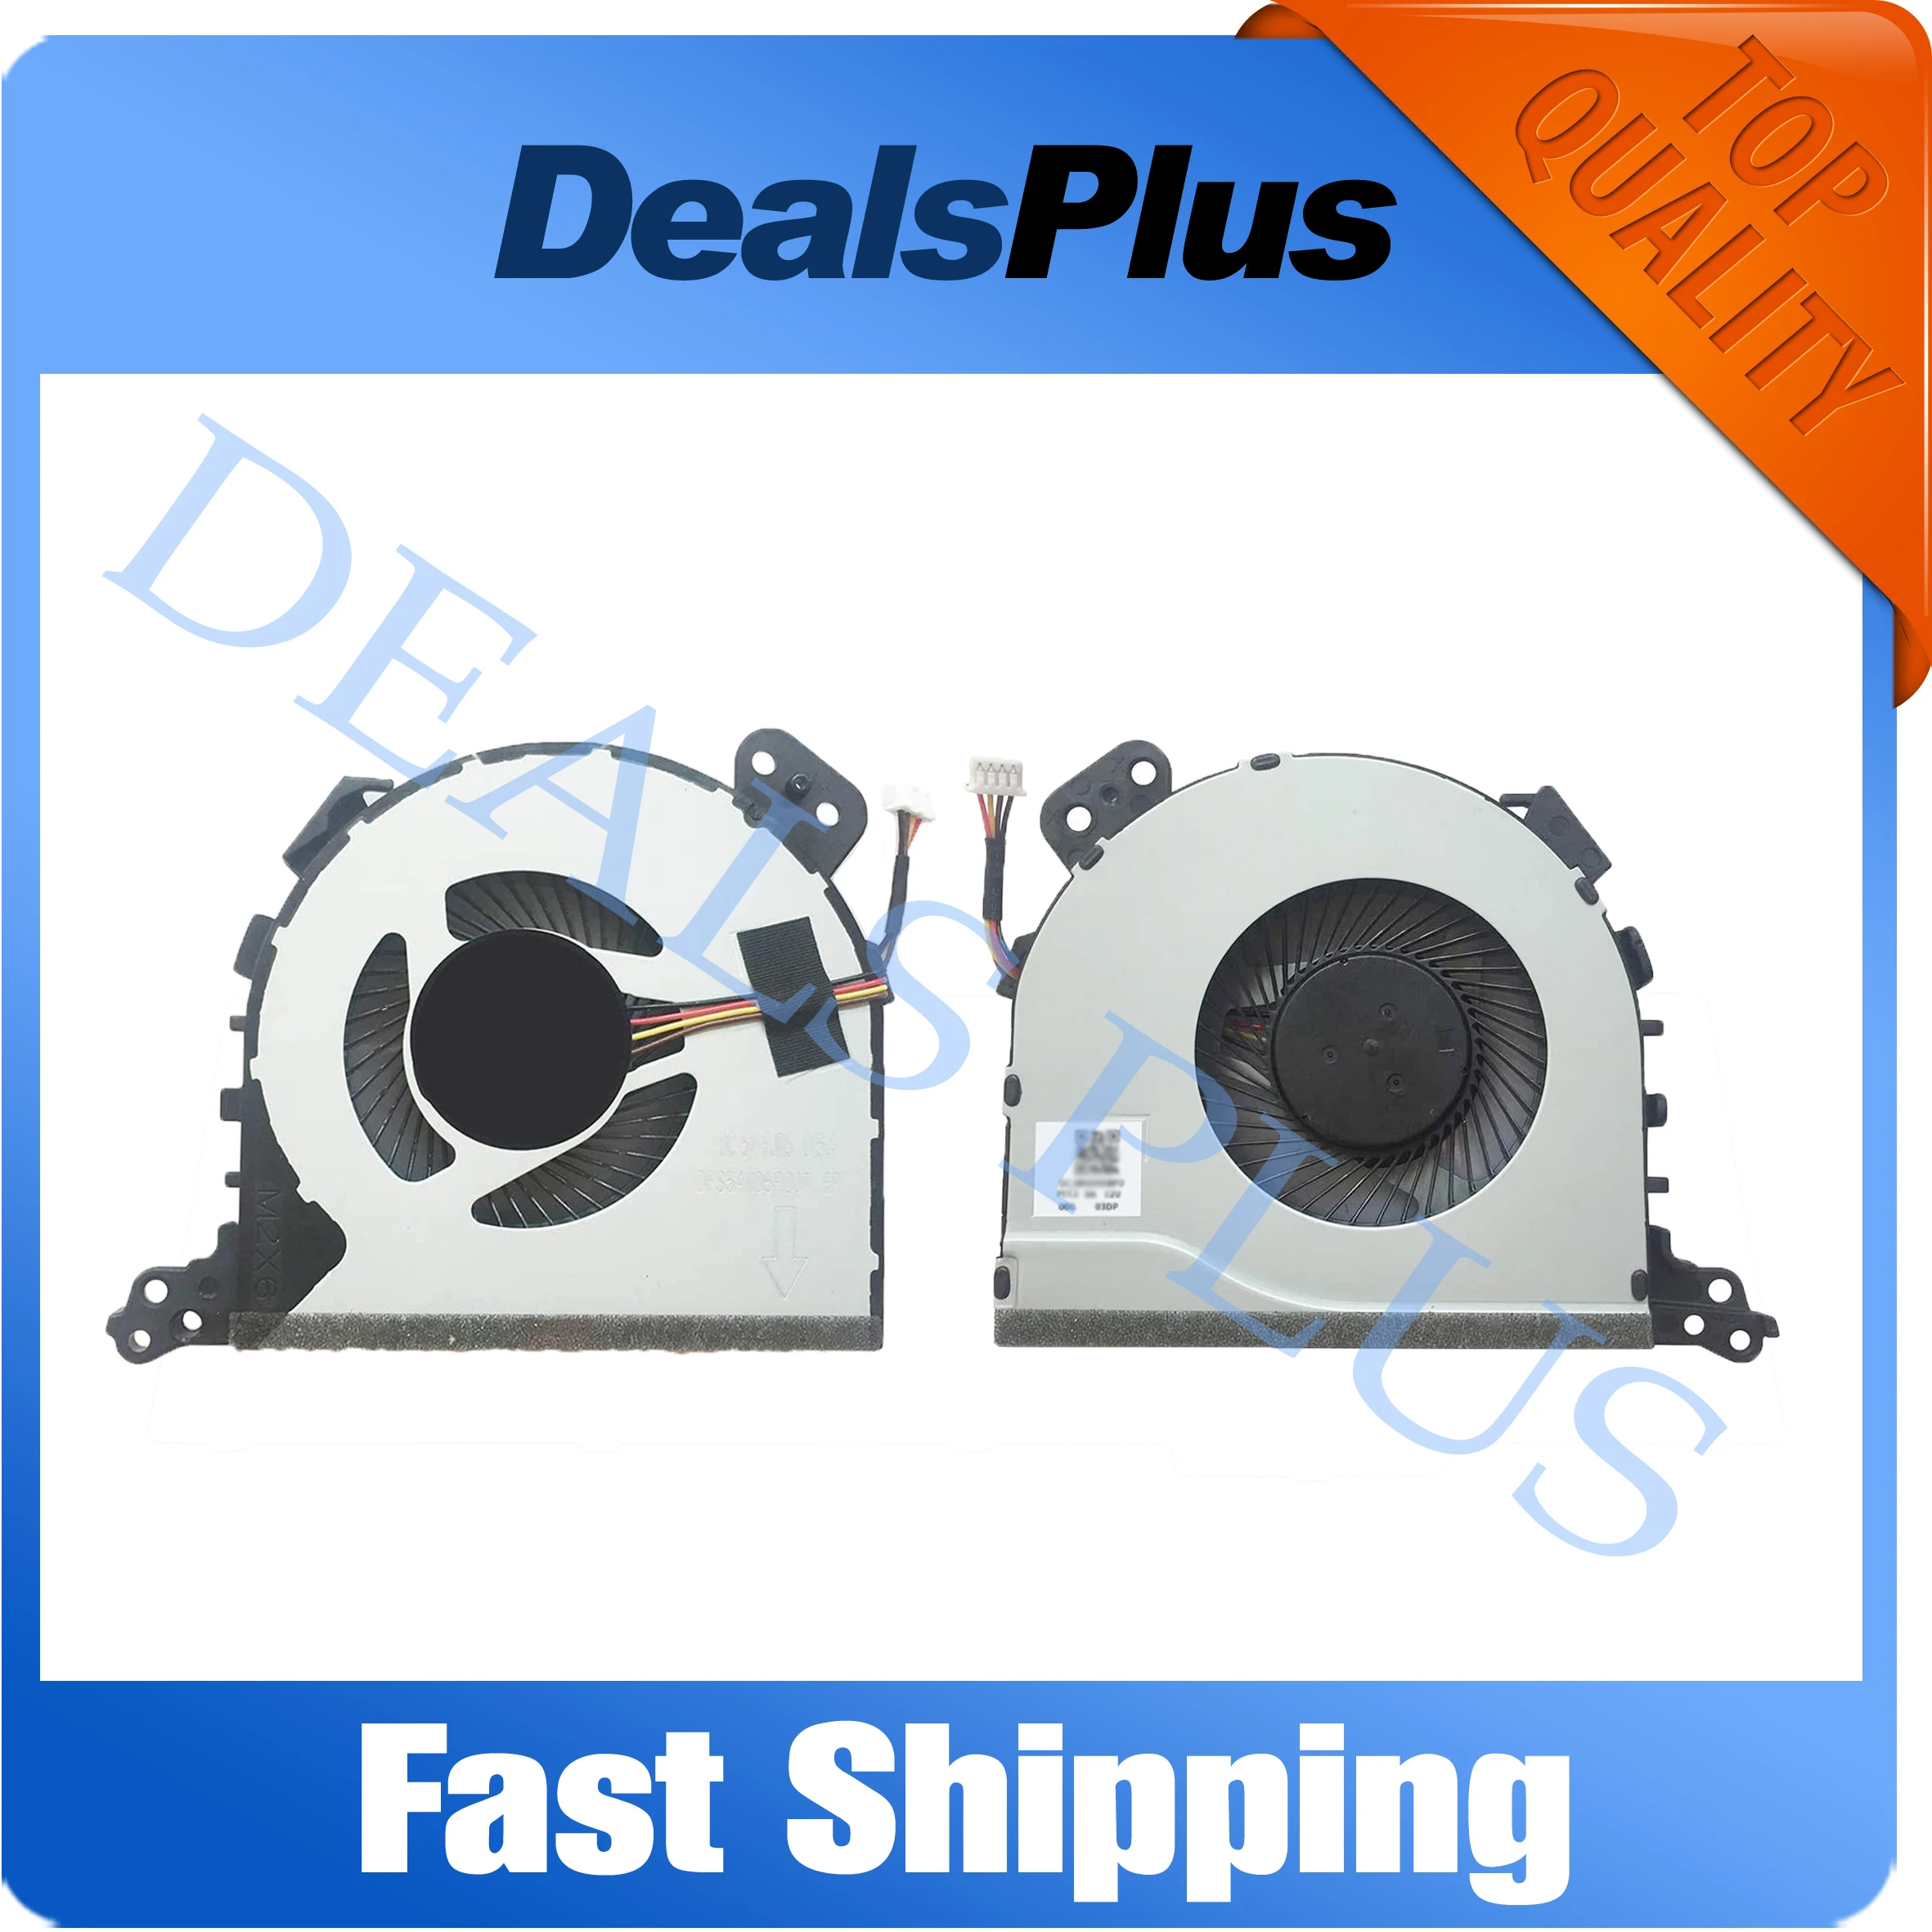 

New CPU Cooler Cooling Fan For Lenovo Ideapad 320-15ISK 320-15IKB 320-15IAP 320-15ABR 320-15AST 320-14IKB 320-14ABR 320-14ISK 32